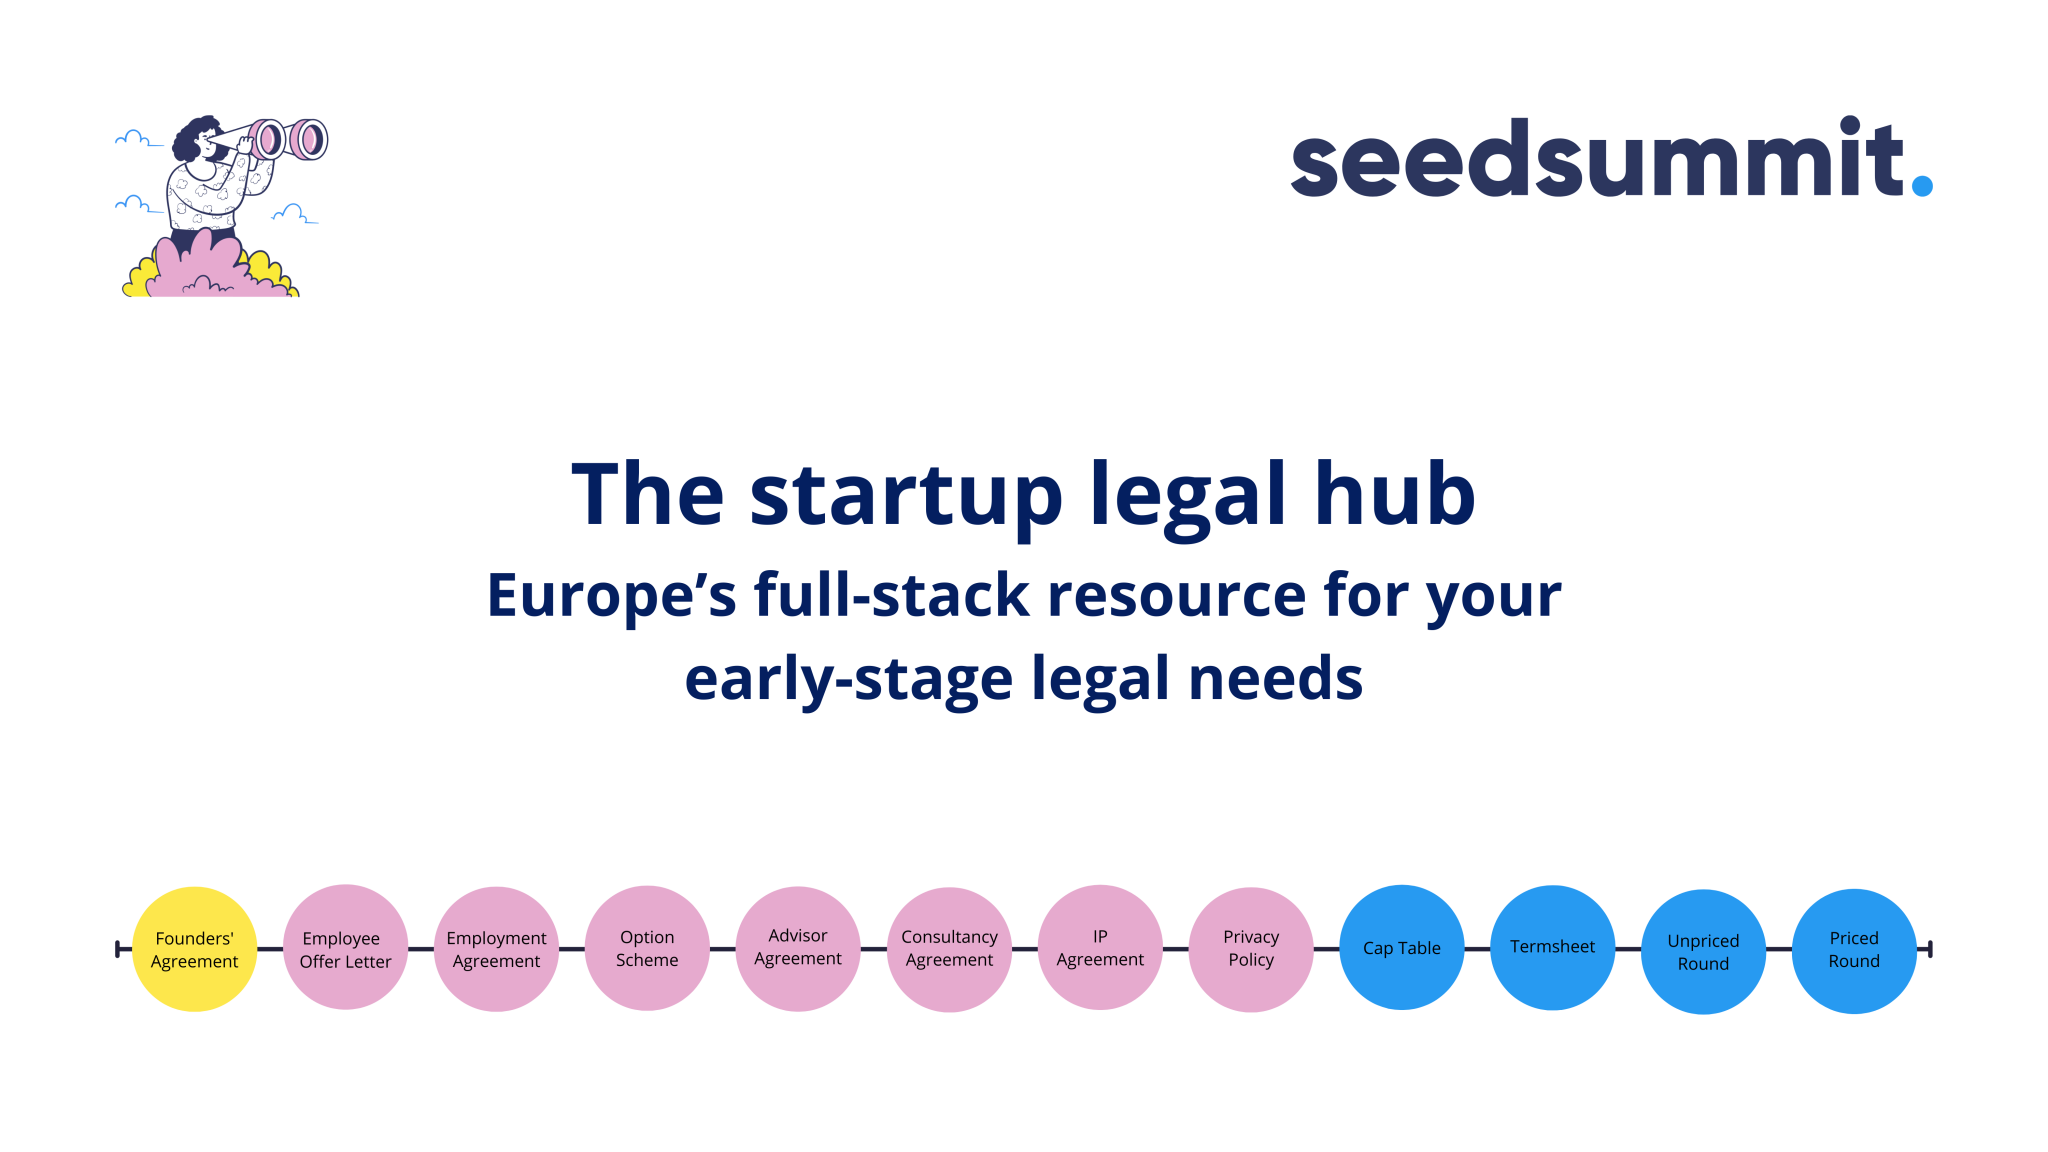 Why we are supporting Seedsummit’s mission to simplify the startup legal journey